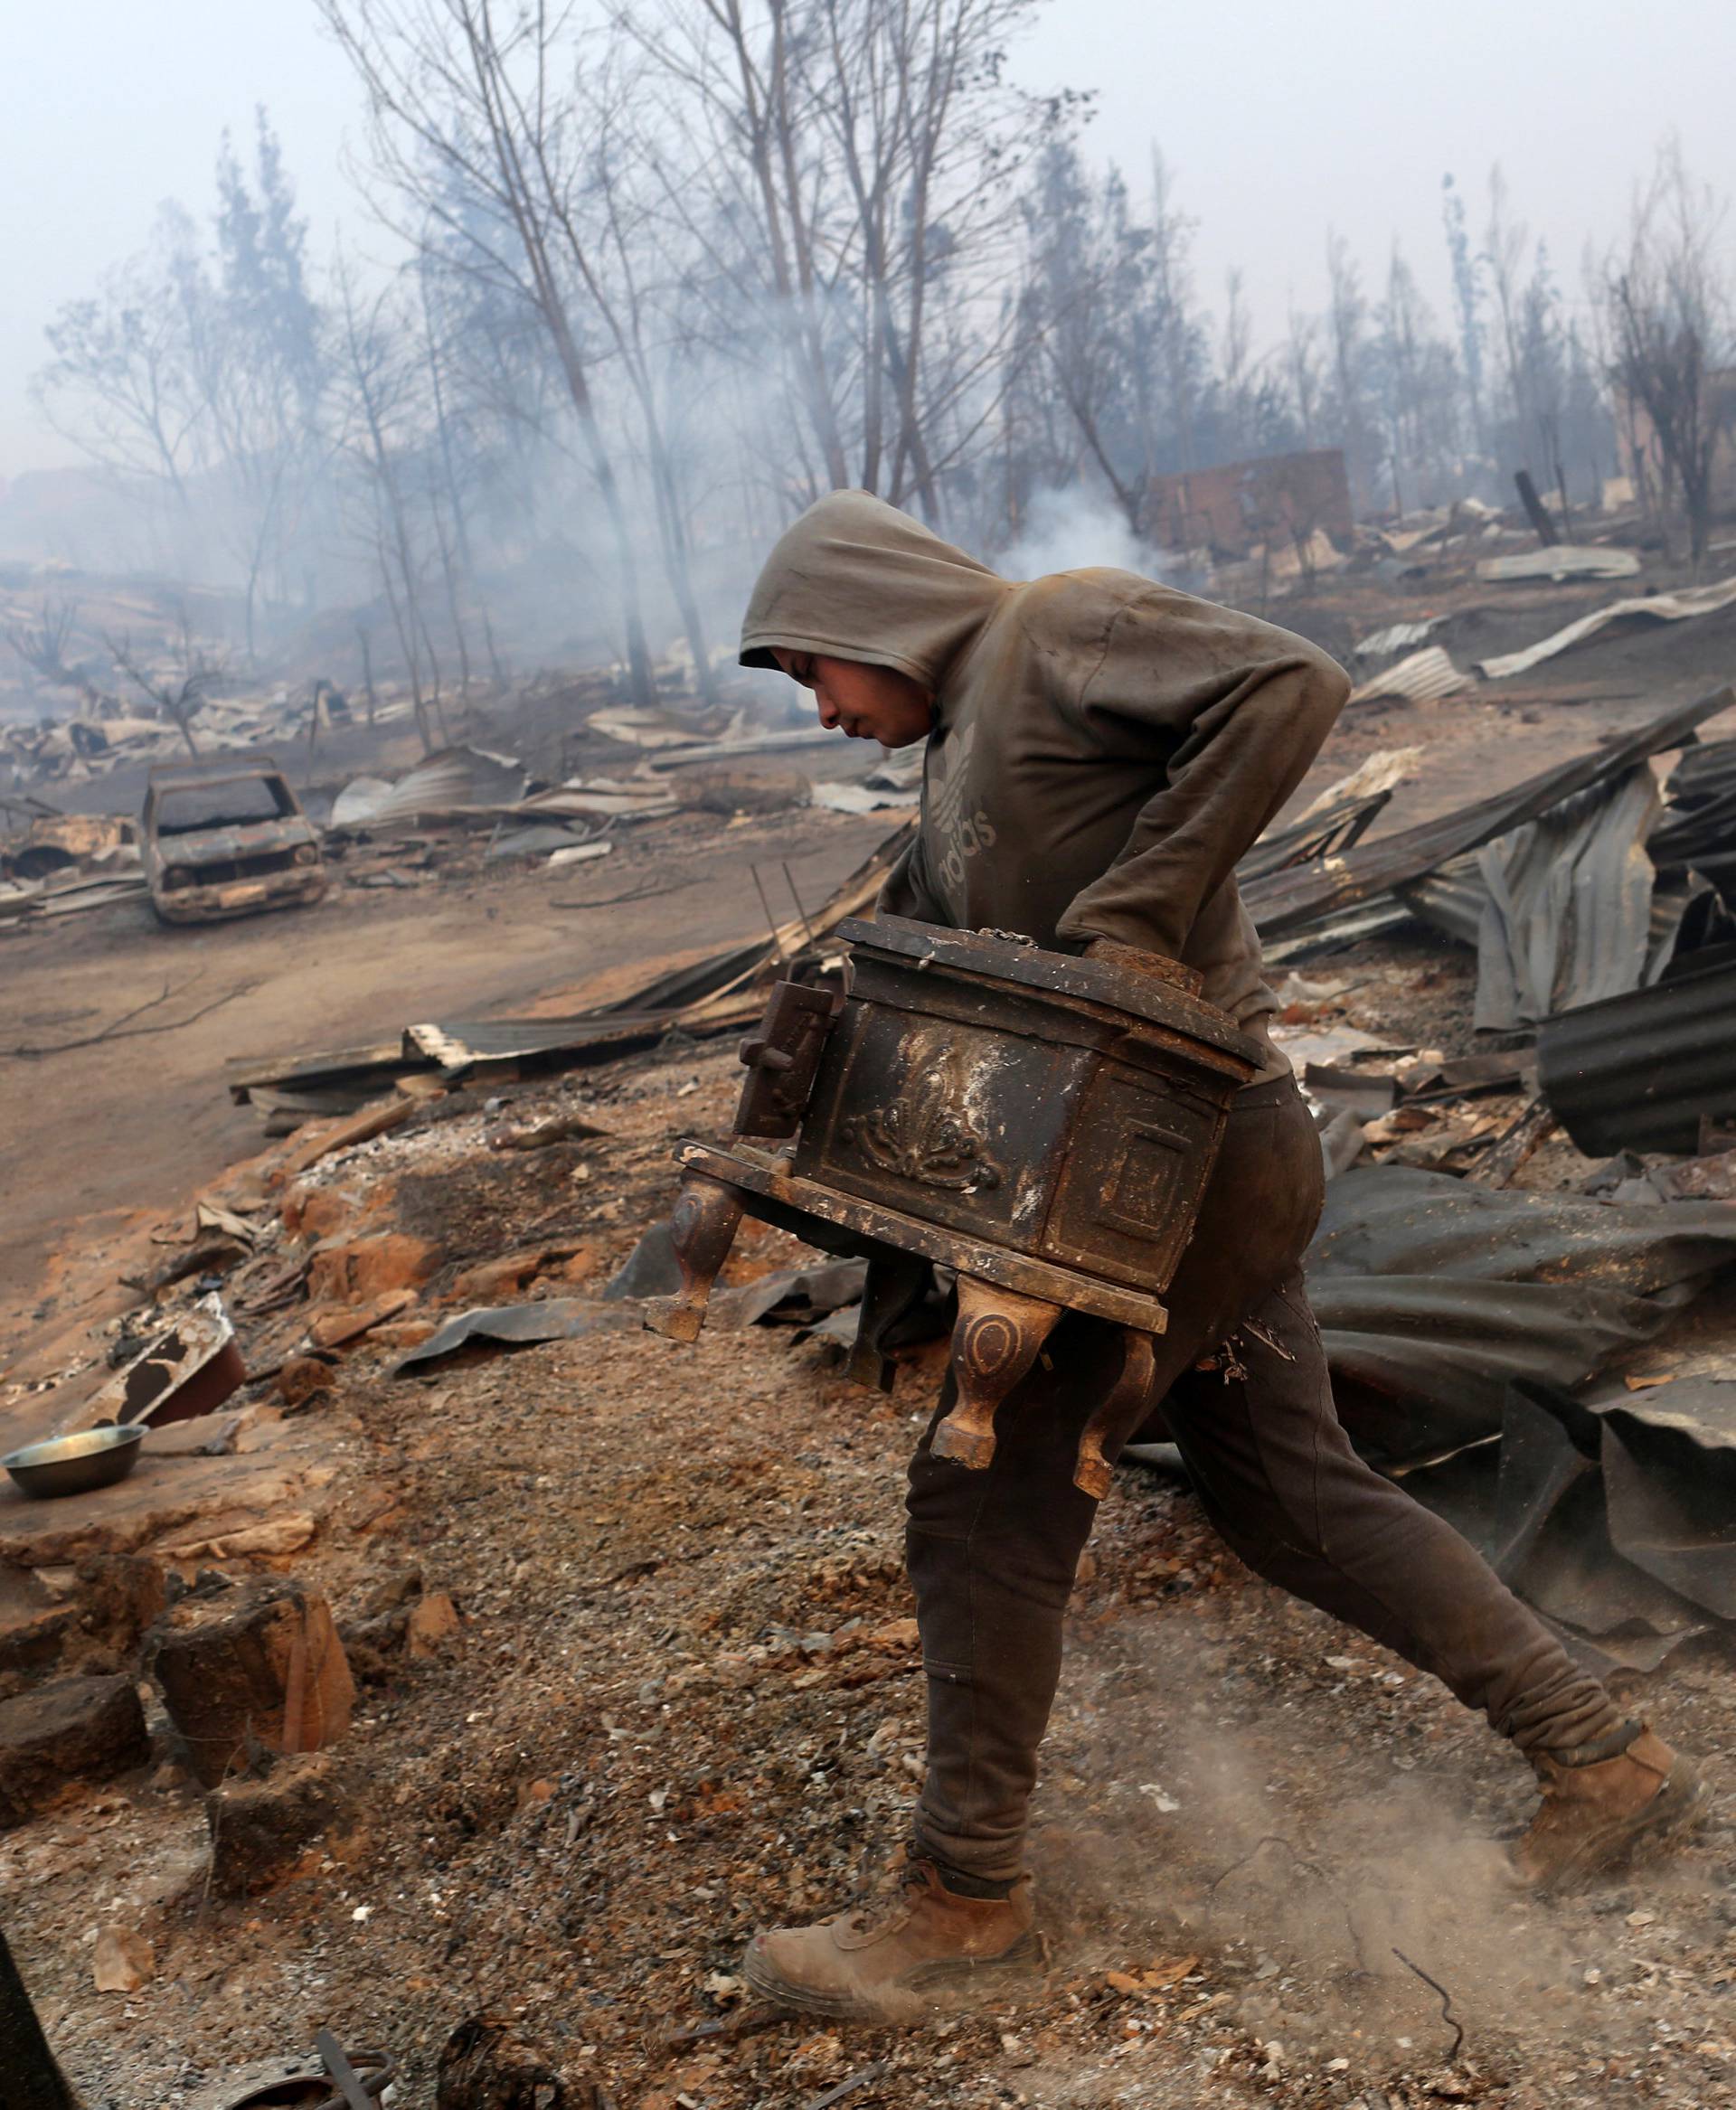 A man carries a stove while walking through the remains of a burnt house as the worst wildfires in Chile's modern history ravage wide swaths of the country's central-south regions, in Santa Olga